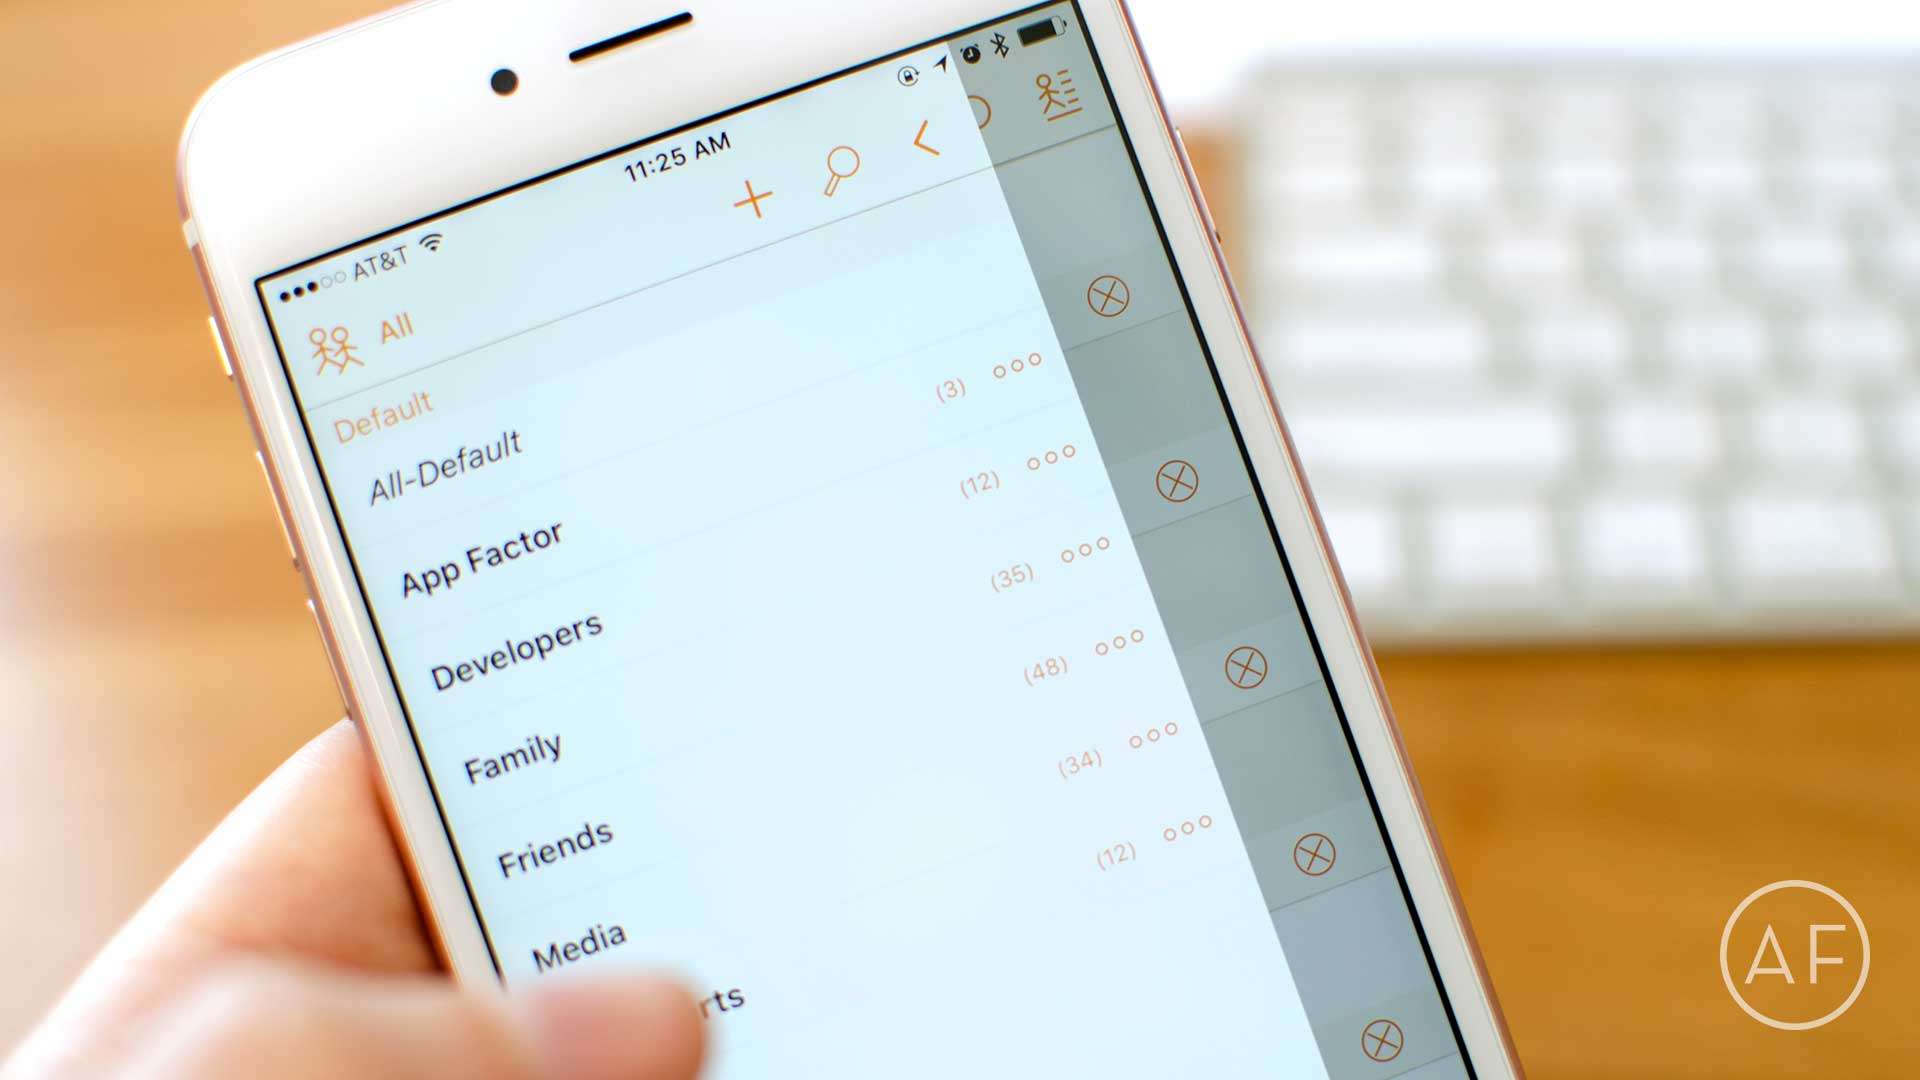 iOS isn't great at managing contacts by default, but as always, there's an app for that.